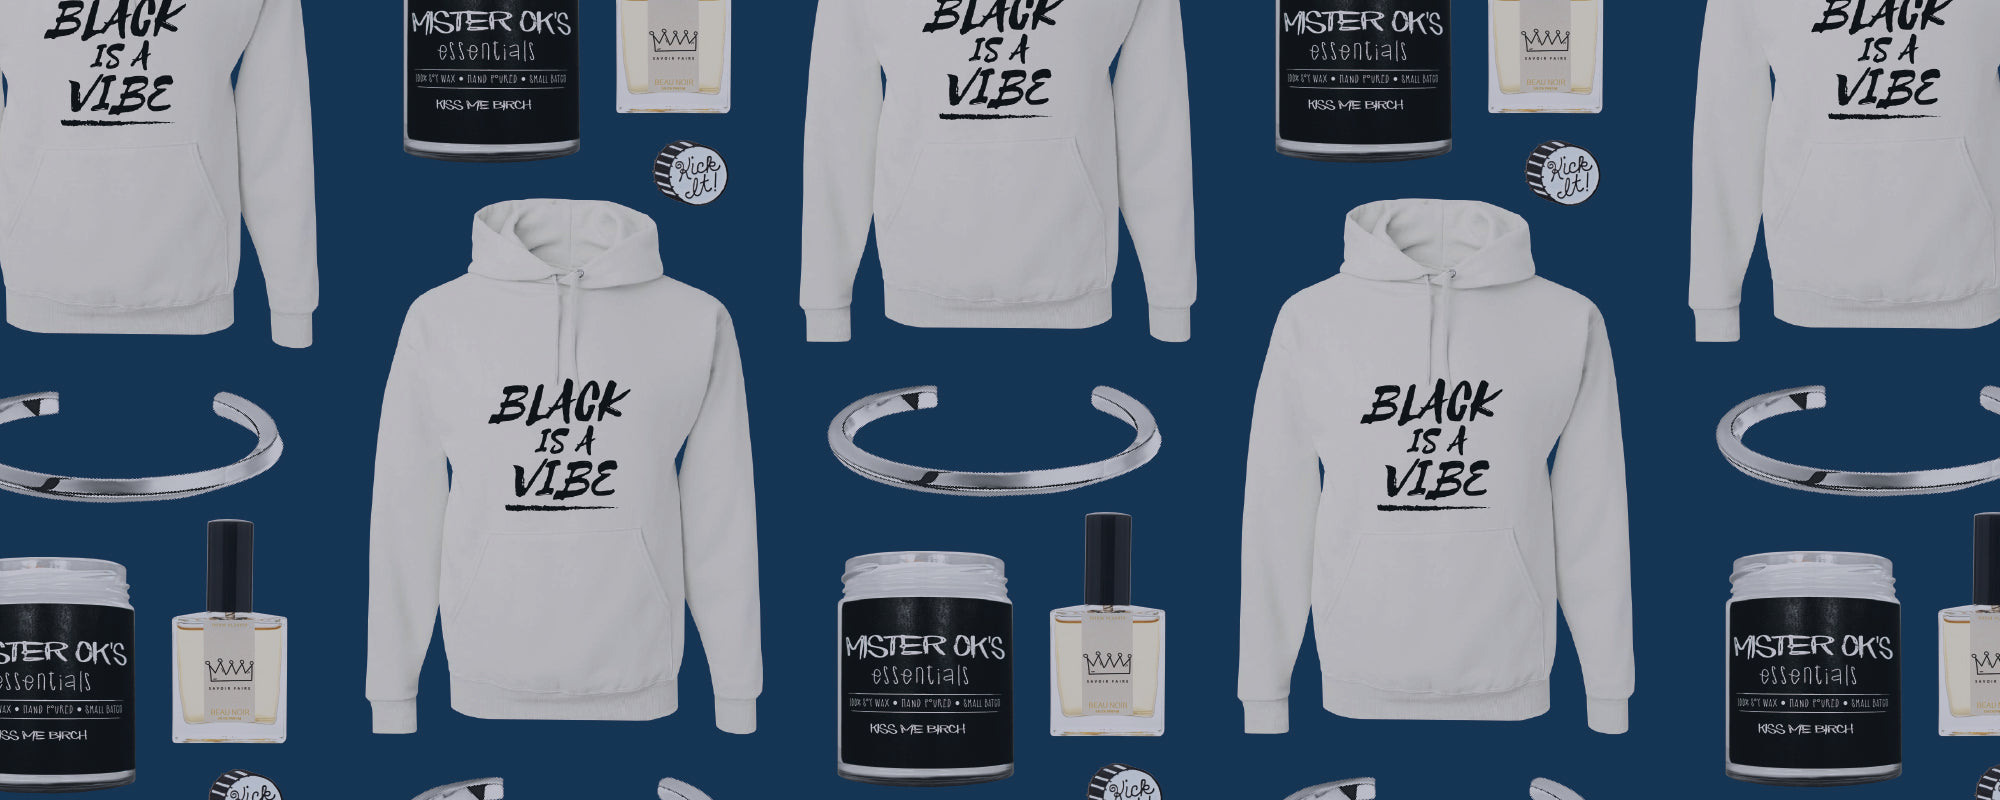 Black-Owned Holiday Gift Guide for Him – all under $100!